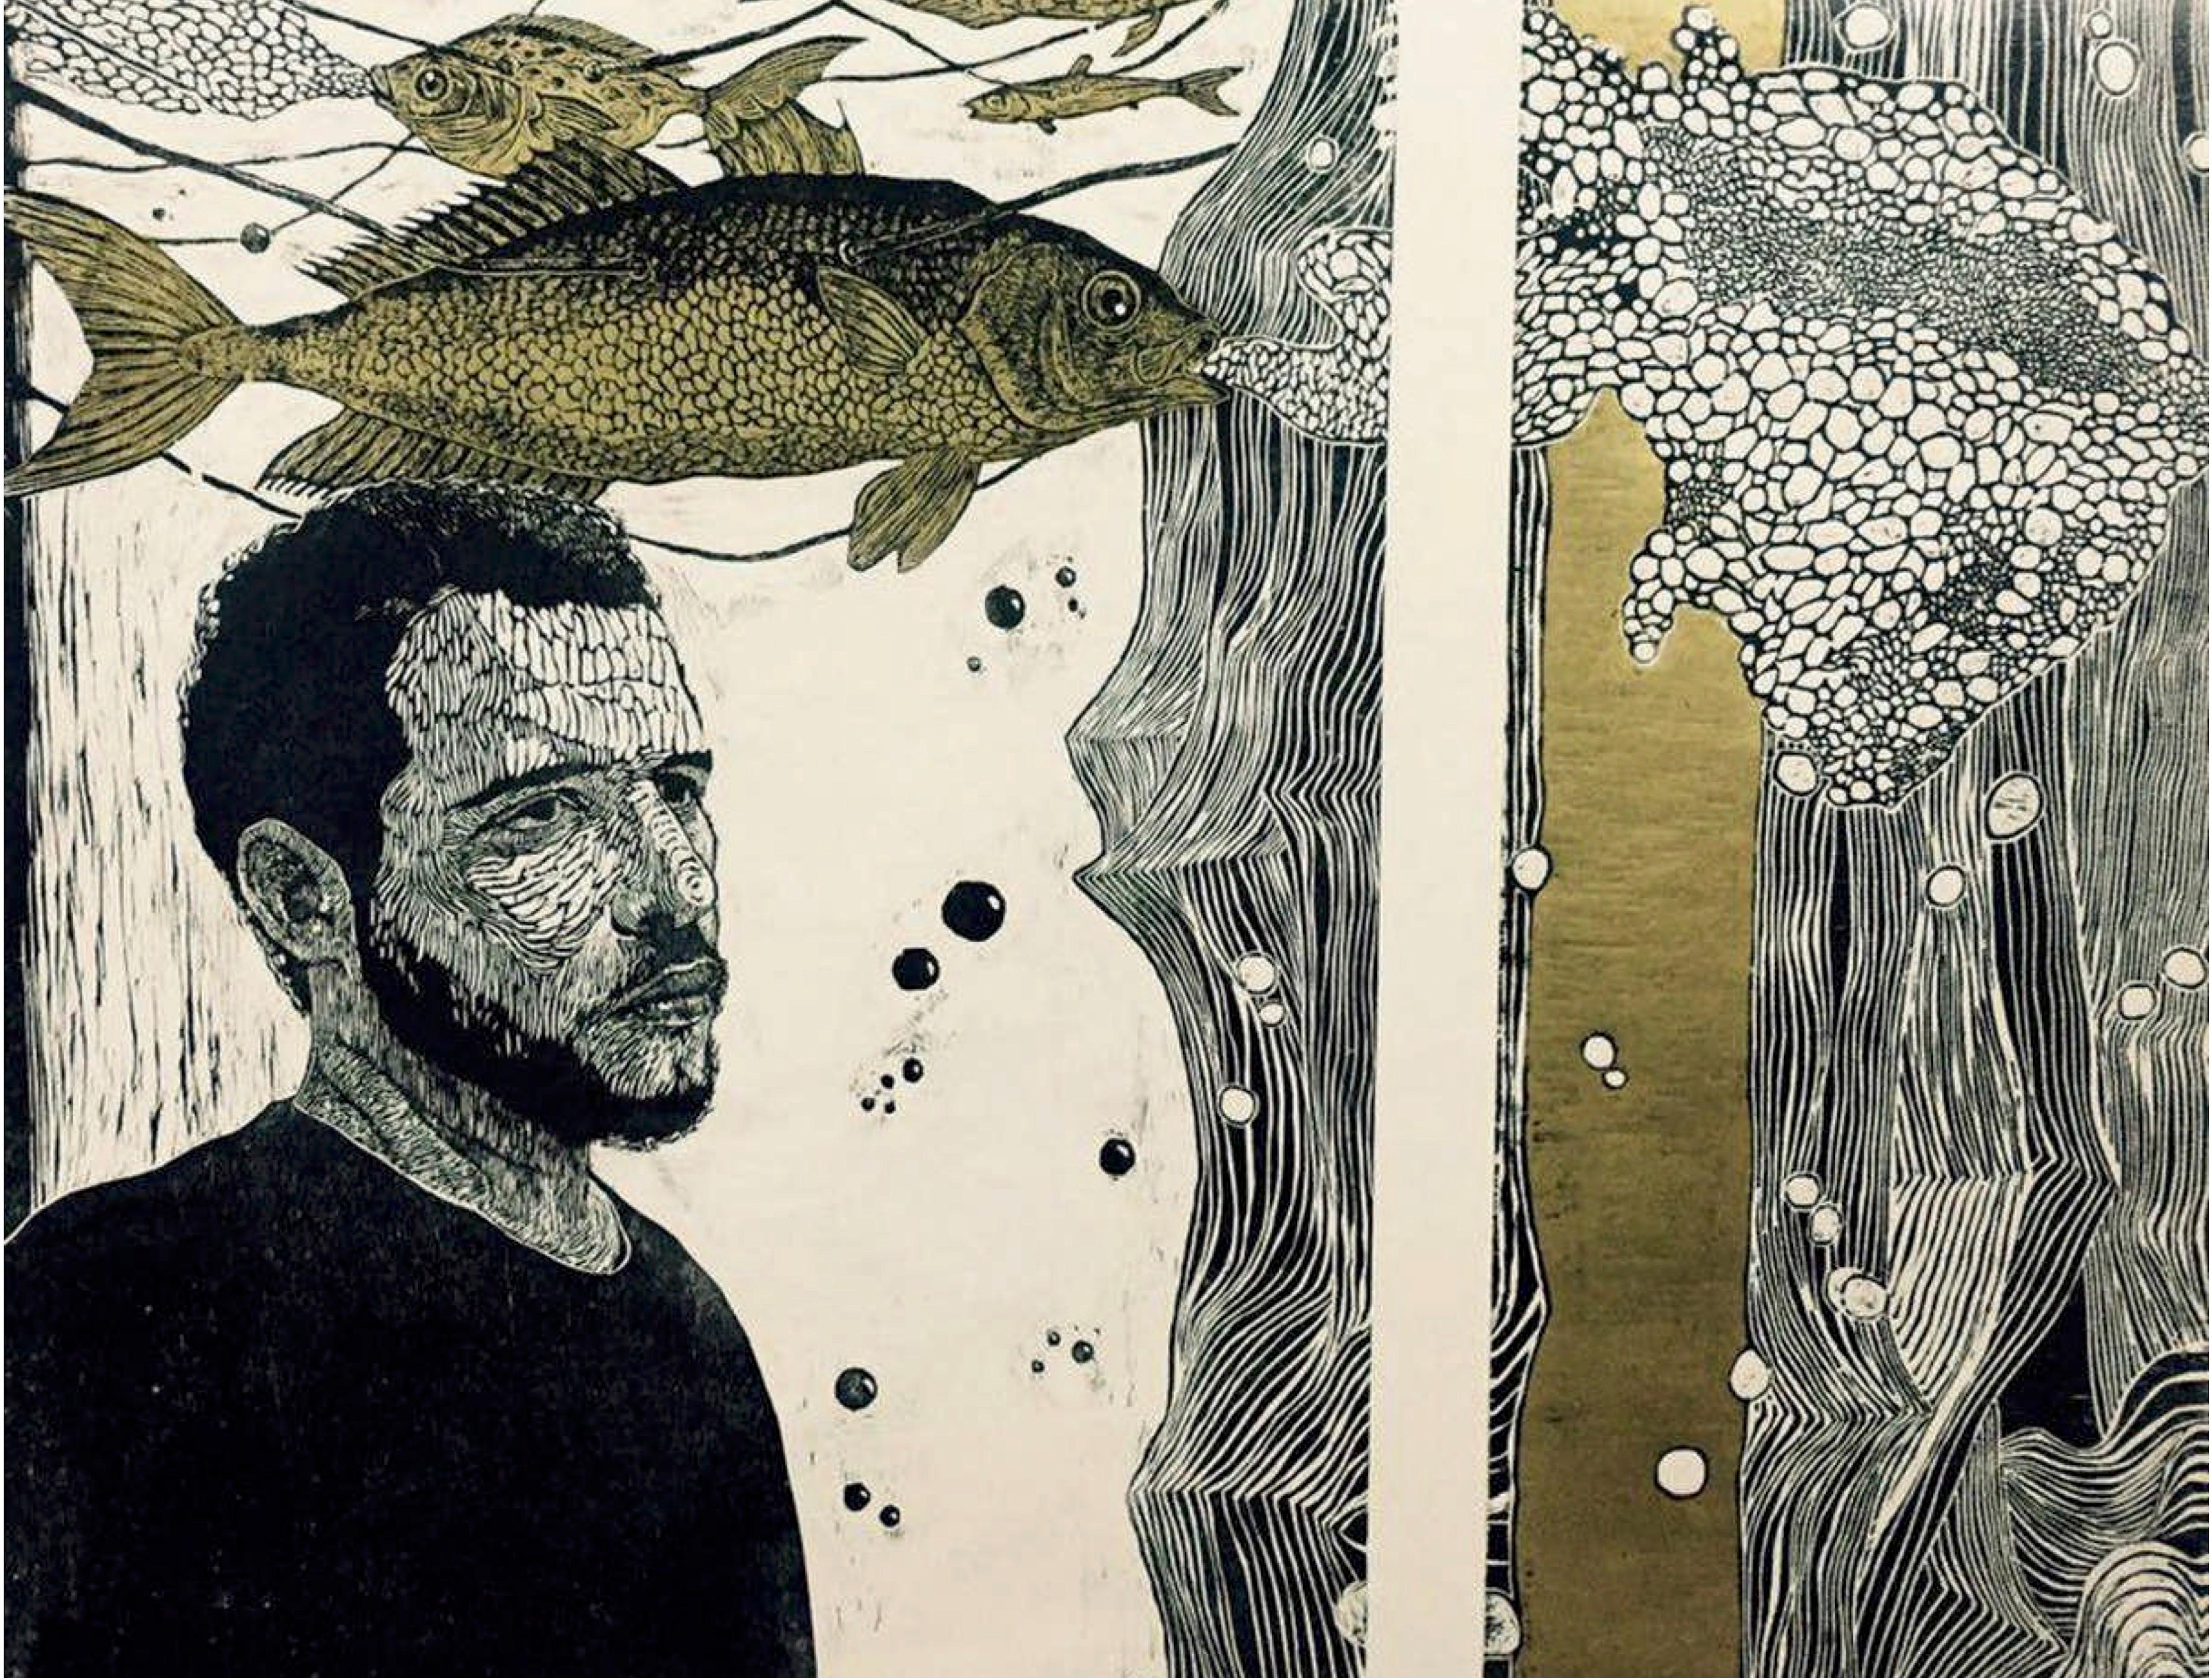 "Man with Fish" Diptych Engraving on Woodcut 32"x38"inch by Ahmed Saber